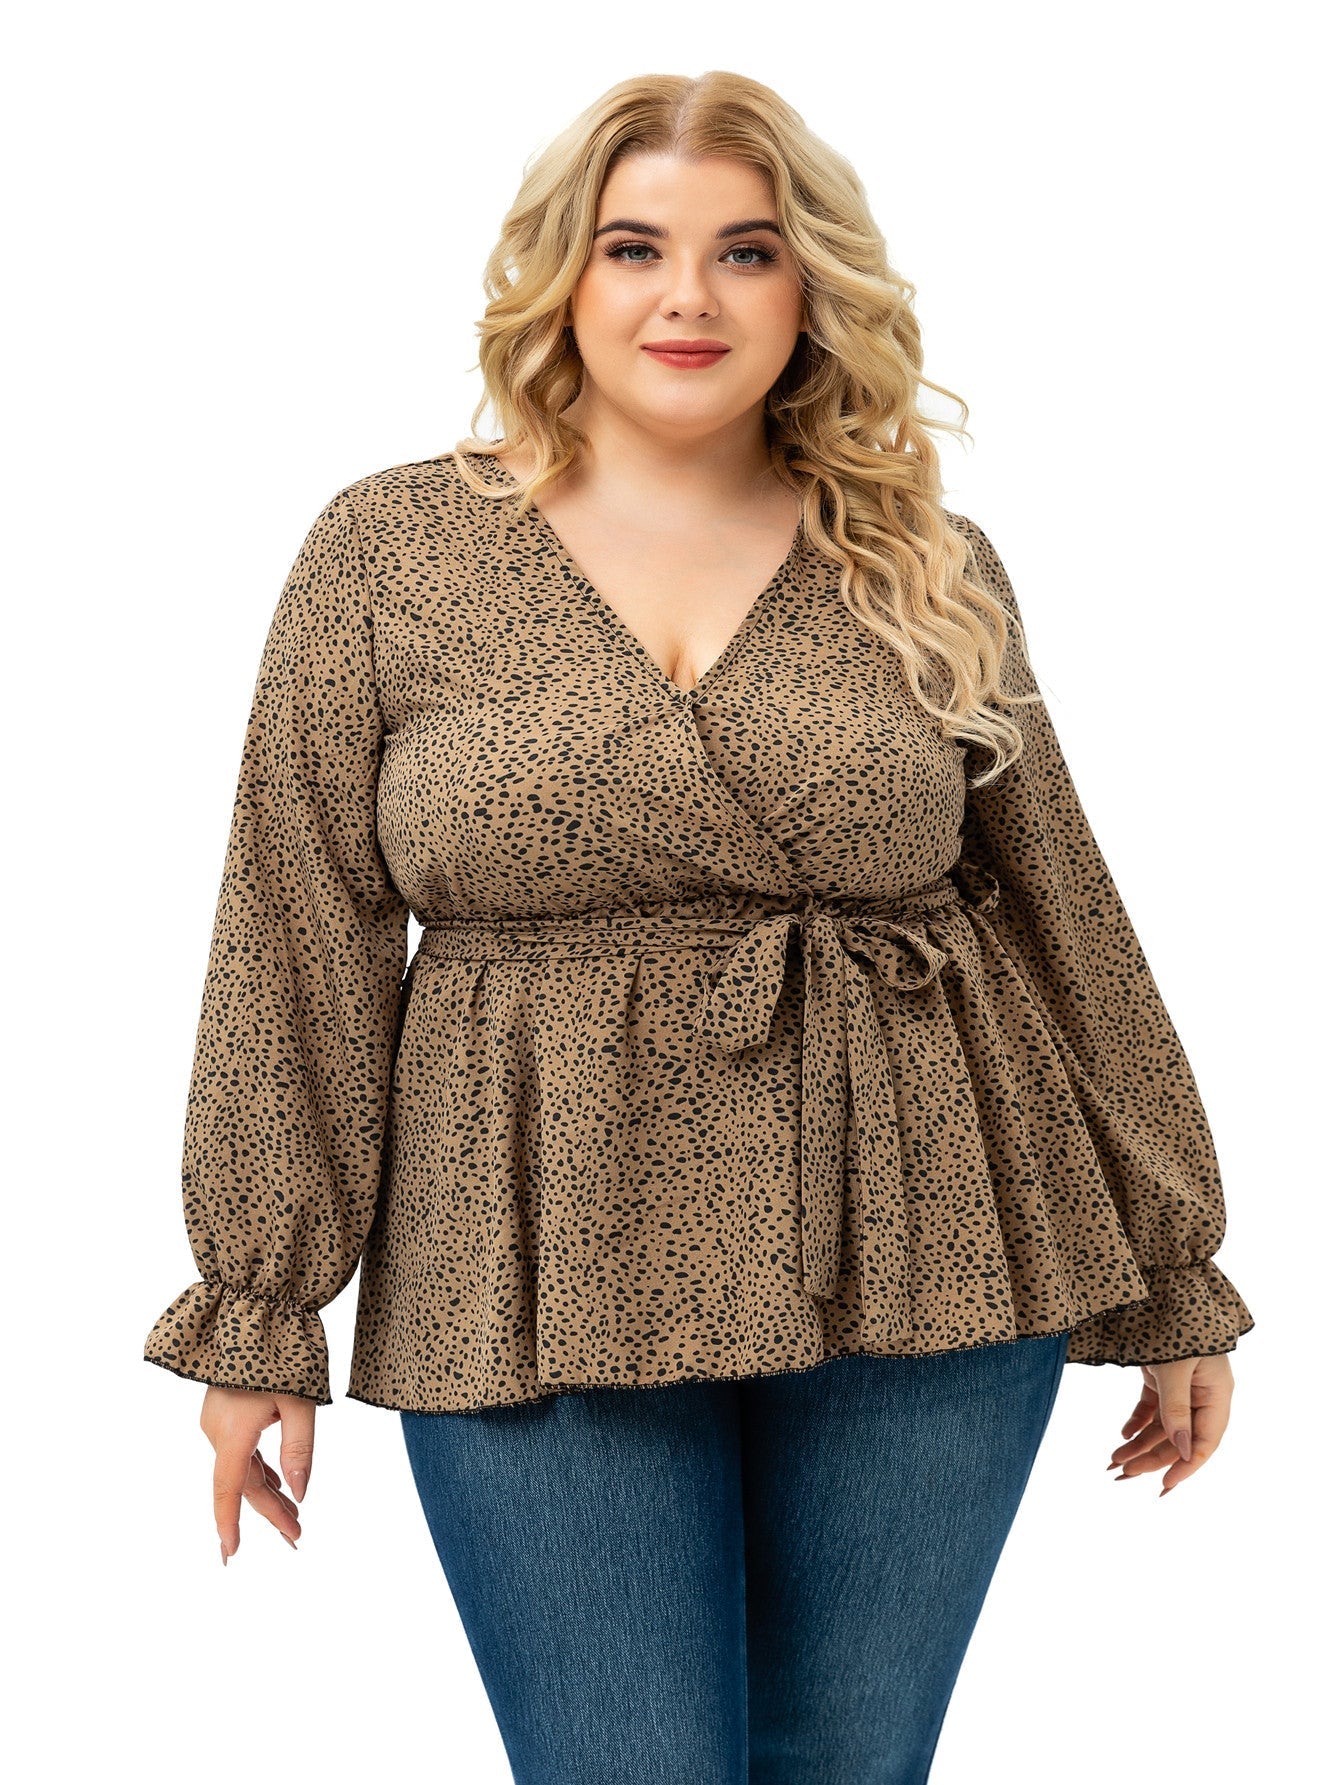 Long Sleeve V Neck Dots with Belt Plus Size Blouse Top Sai Feel